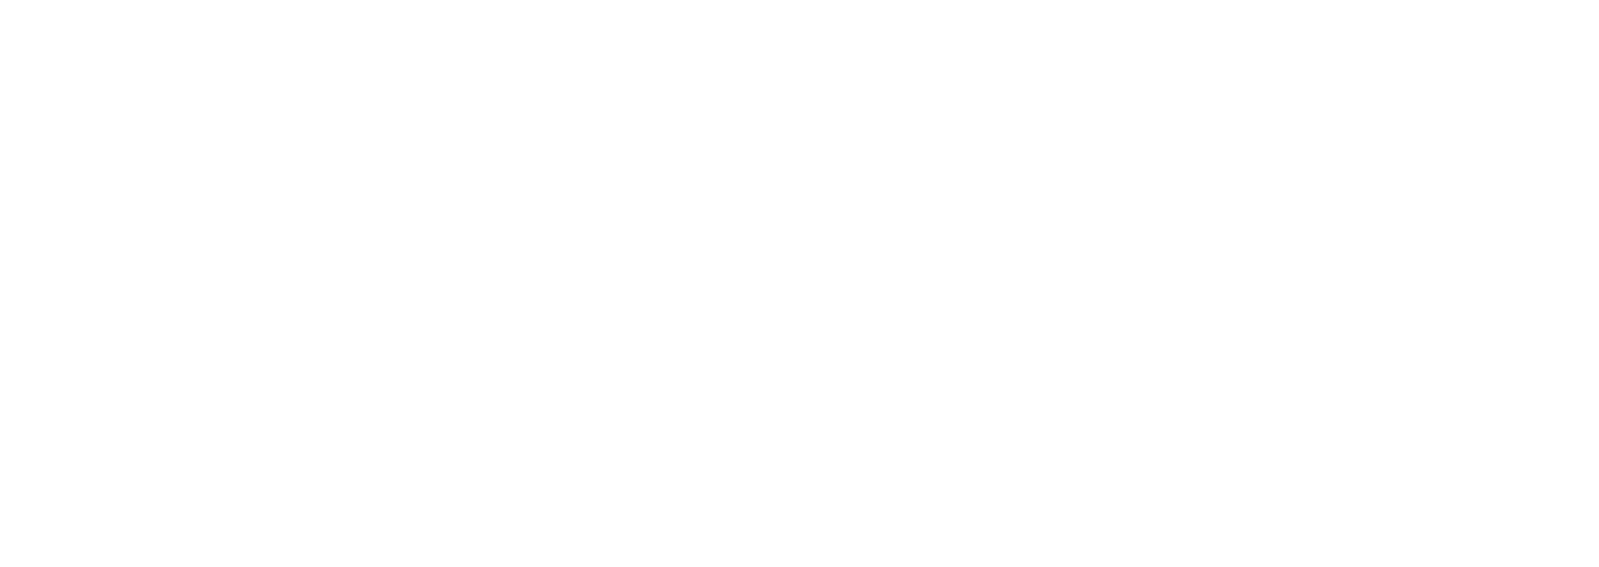 The Last of Us Outbreak Day